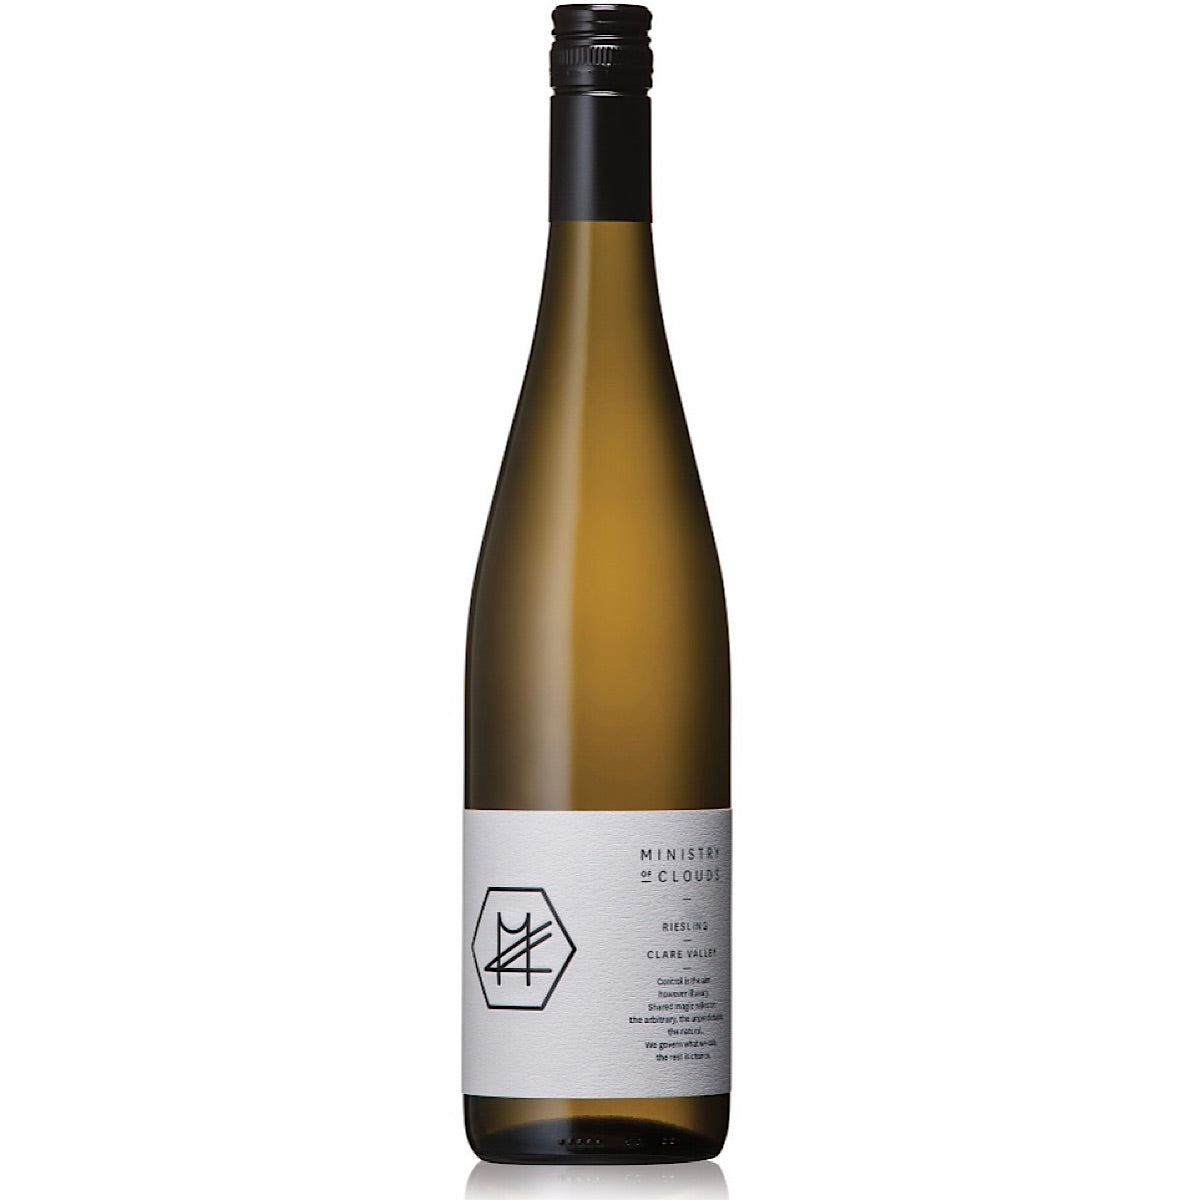 Ministry of Clouds, Riesling 6 Bottle Case 75cl